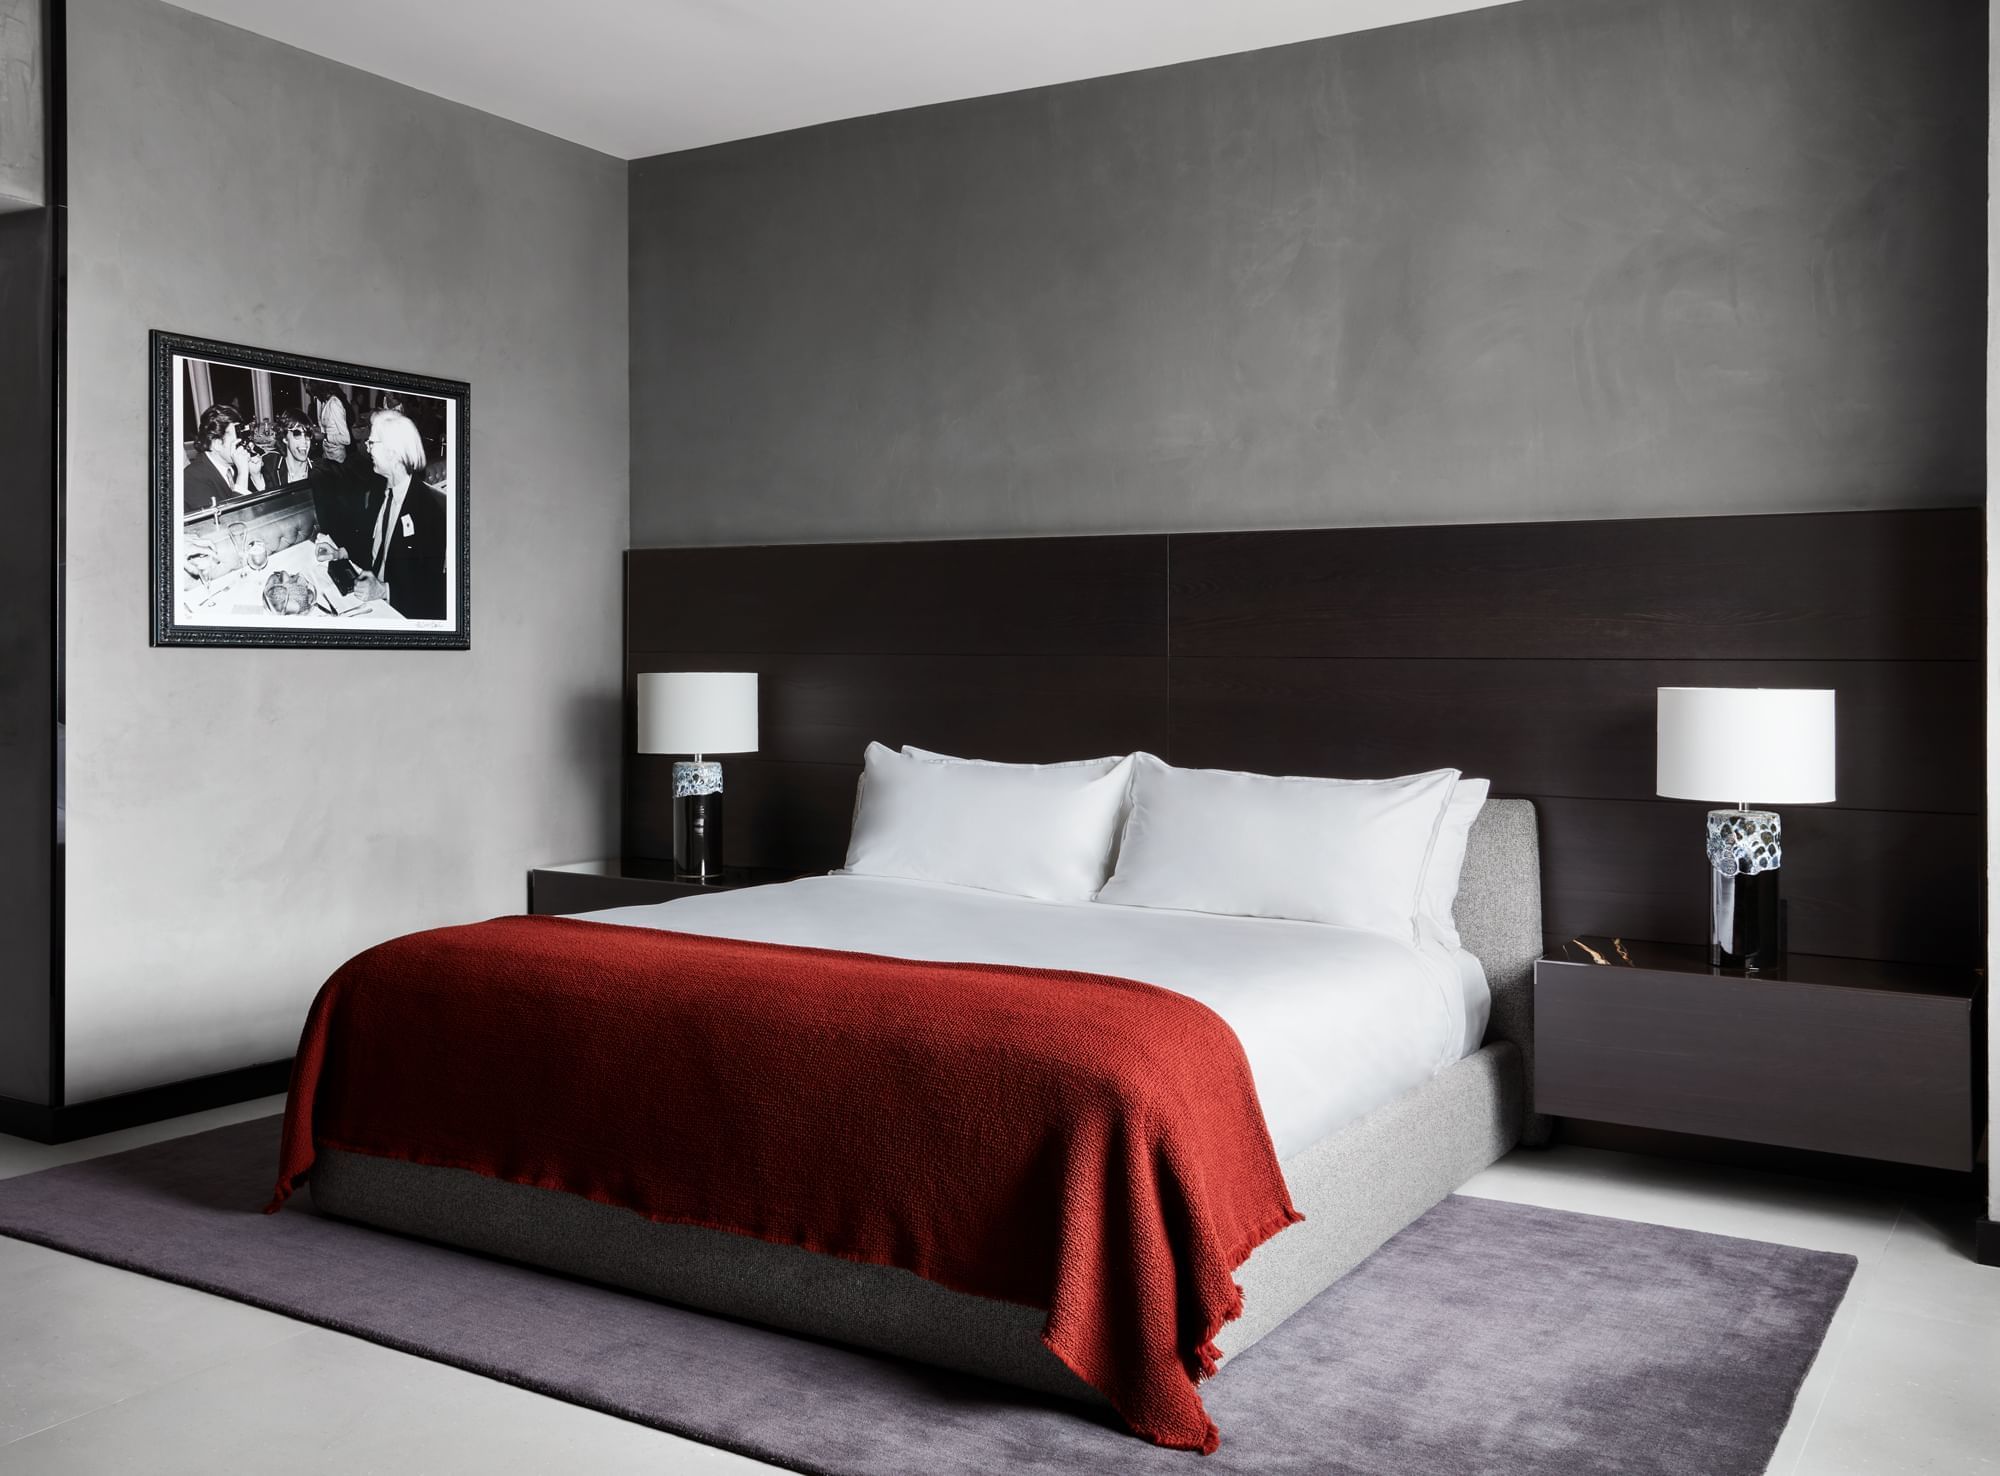 Gansevoort rooms - Boutique hotels Meatpacking District New York